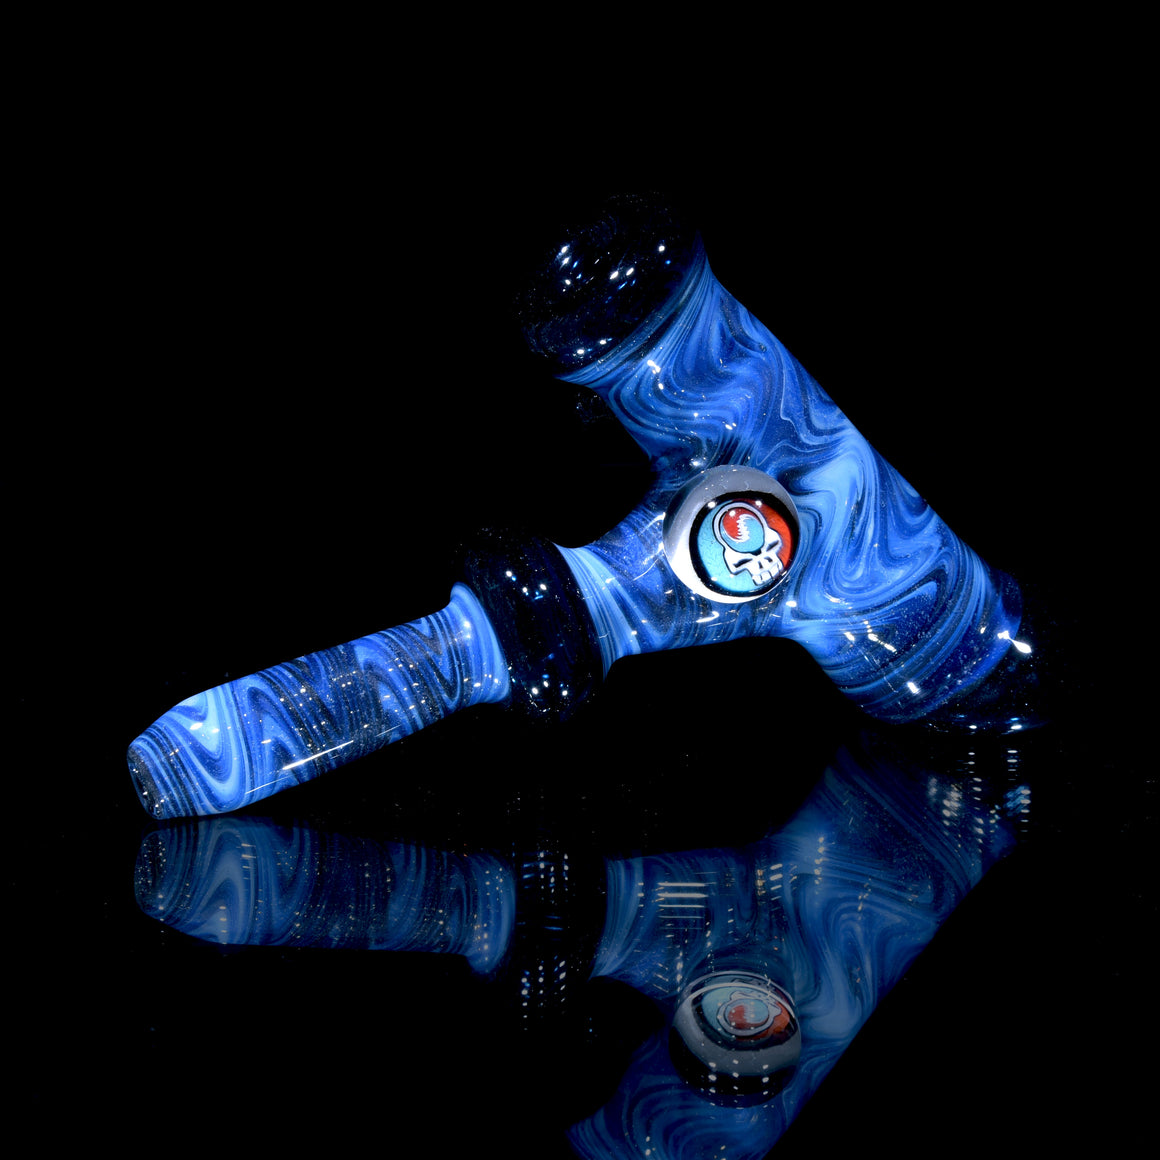 Fully-worked Dry Layback Hammer w/ Grateful Dead Millie - Moonstone/Blue Stardust